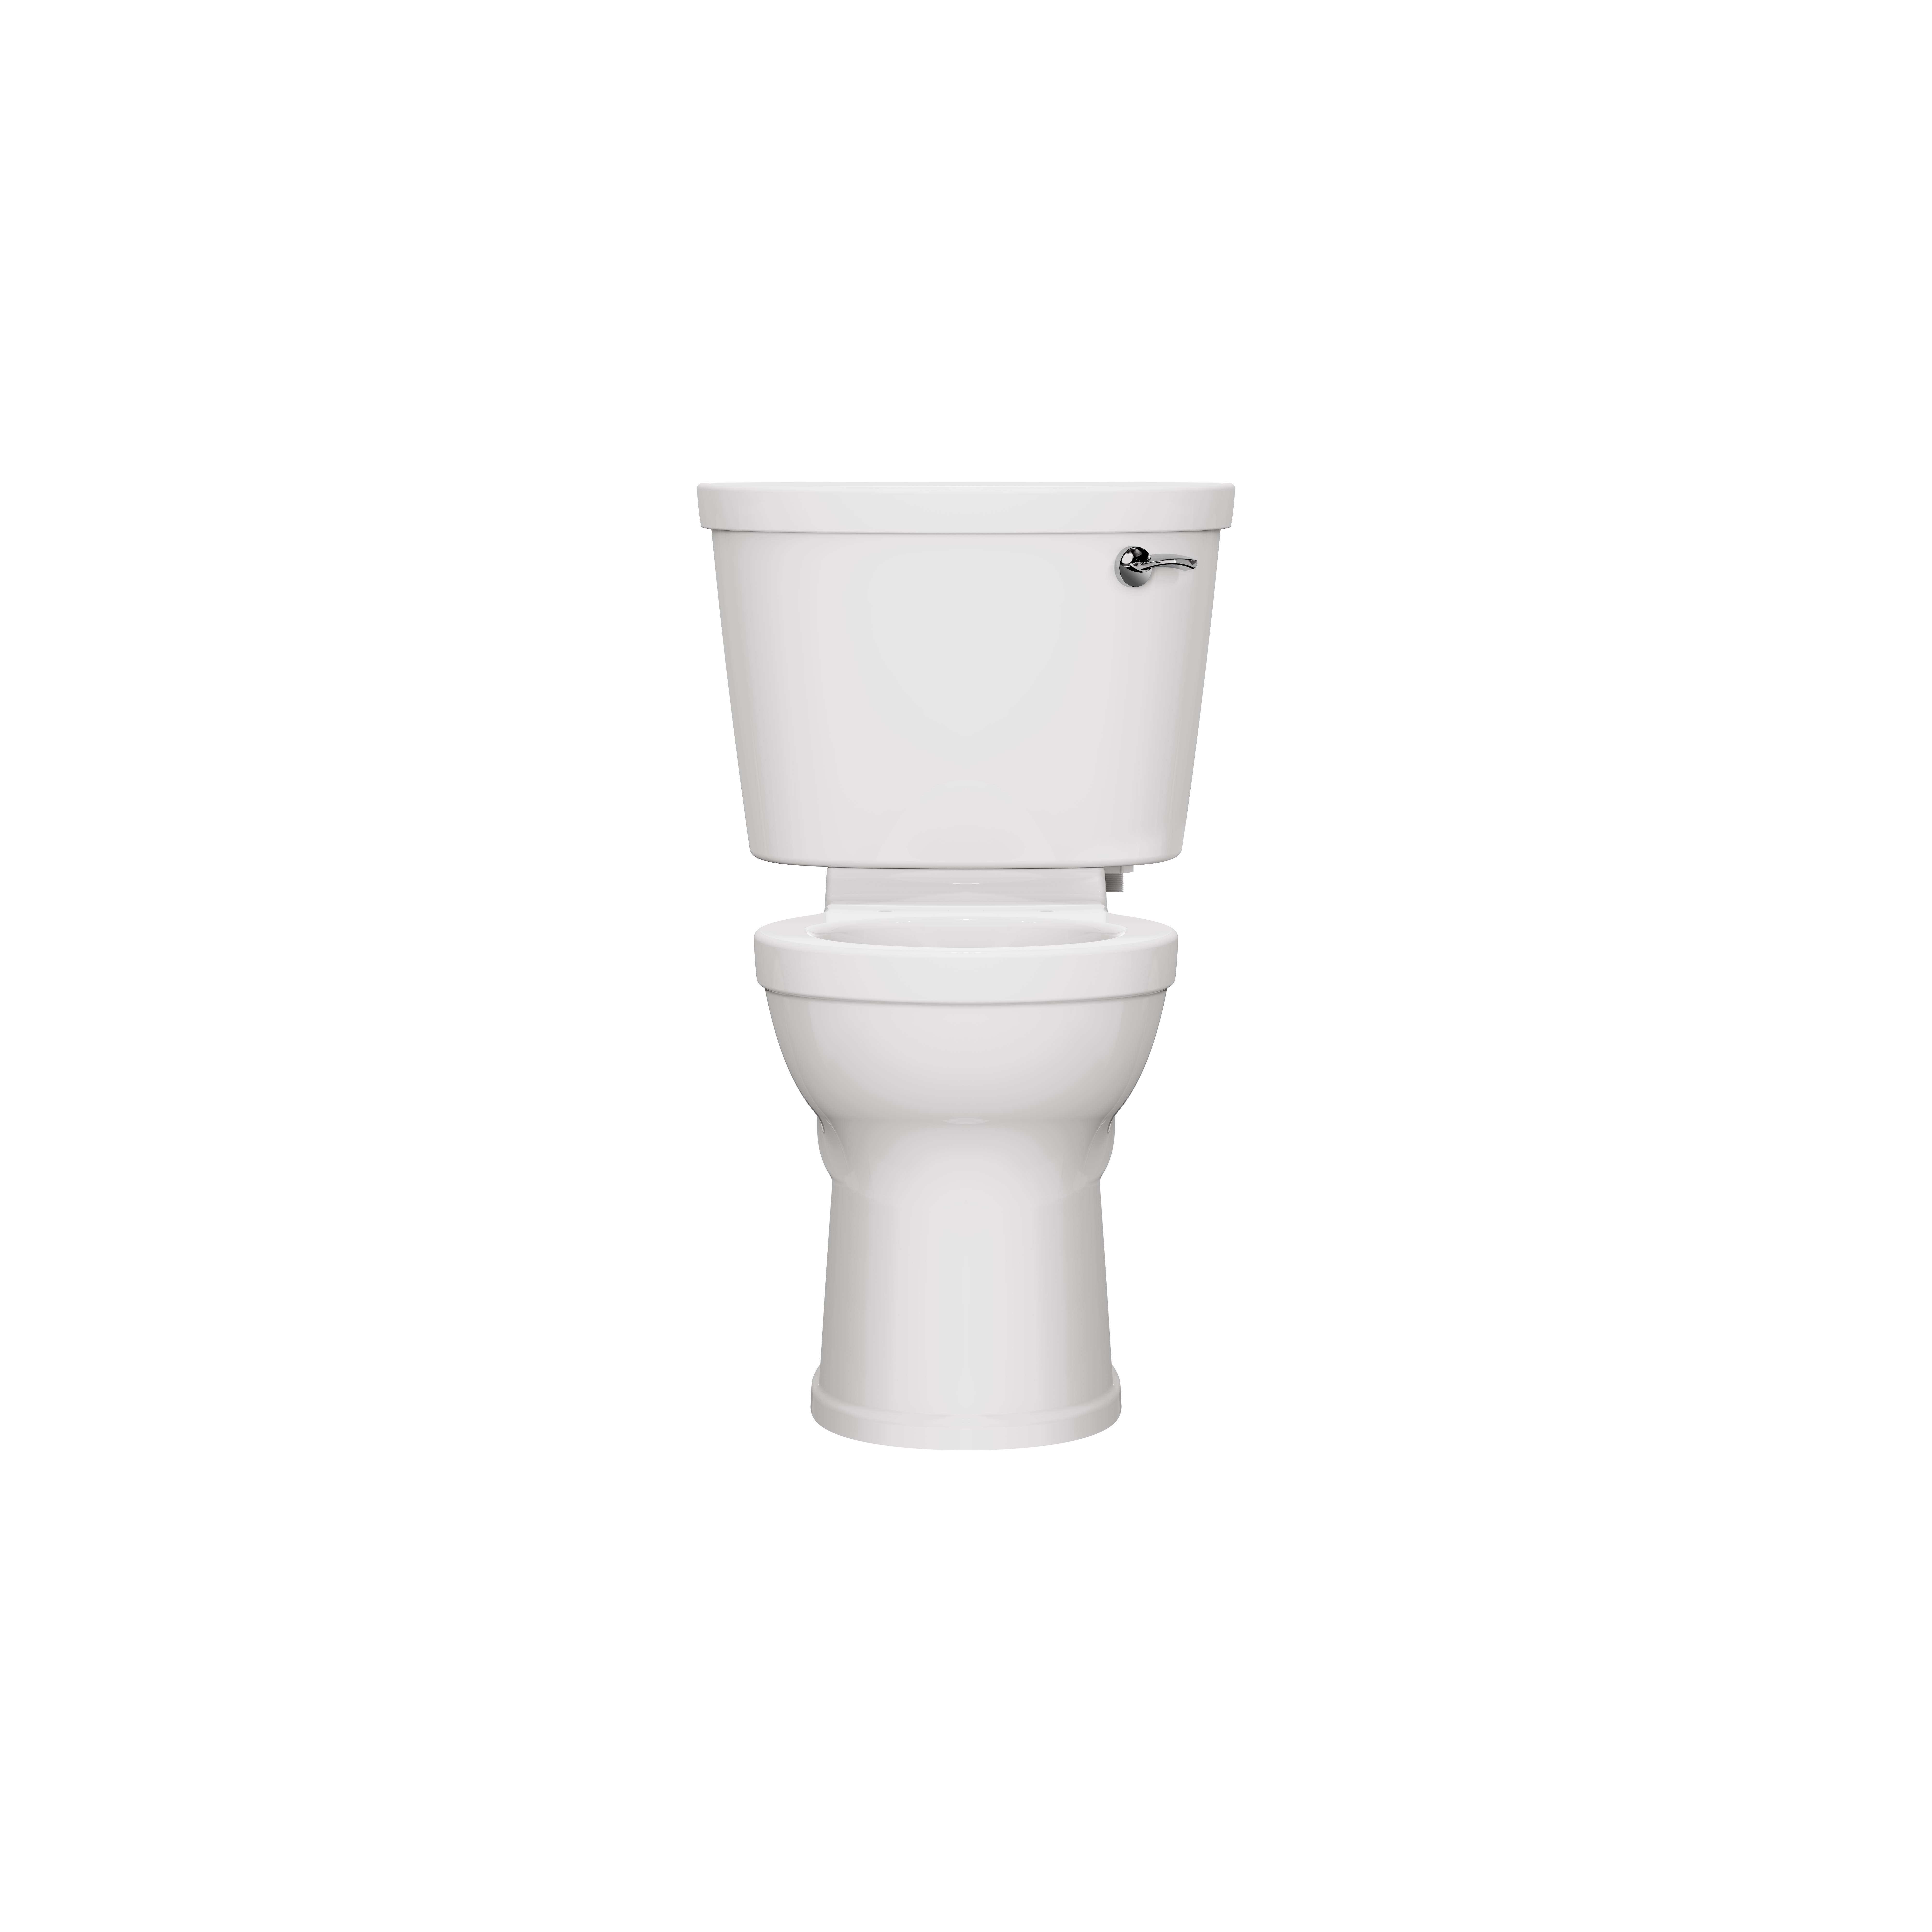 Champion PRO Two-Piece 1.28 gpf/4.8 Lpf Chair Height Elongated Right-Hand Trip Lever Toilet Less Seat